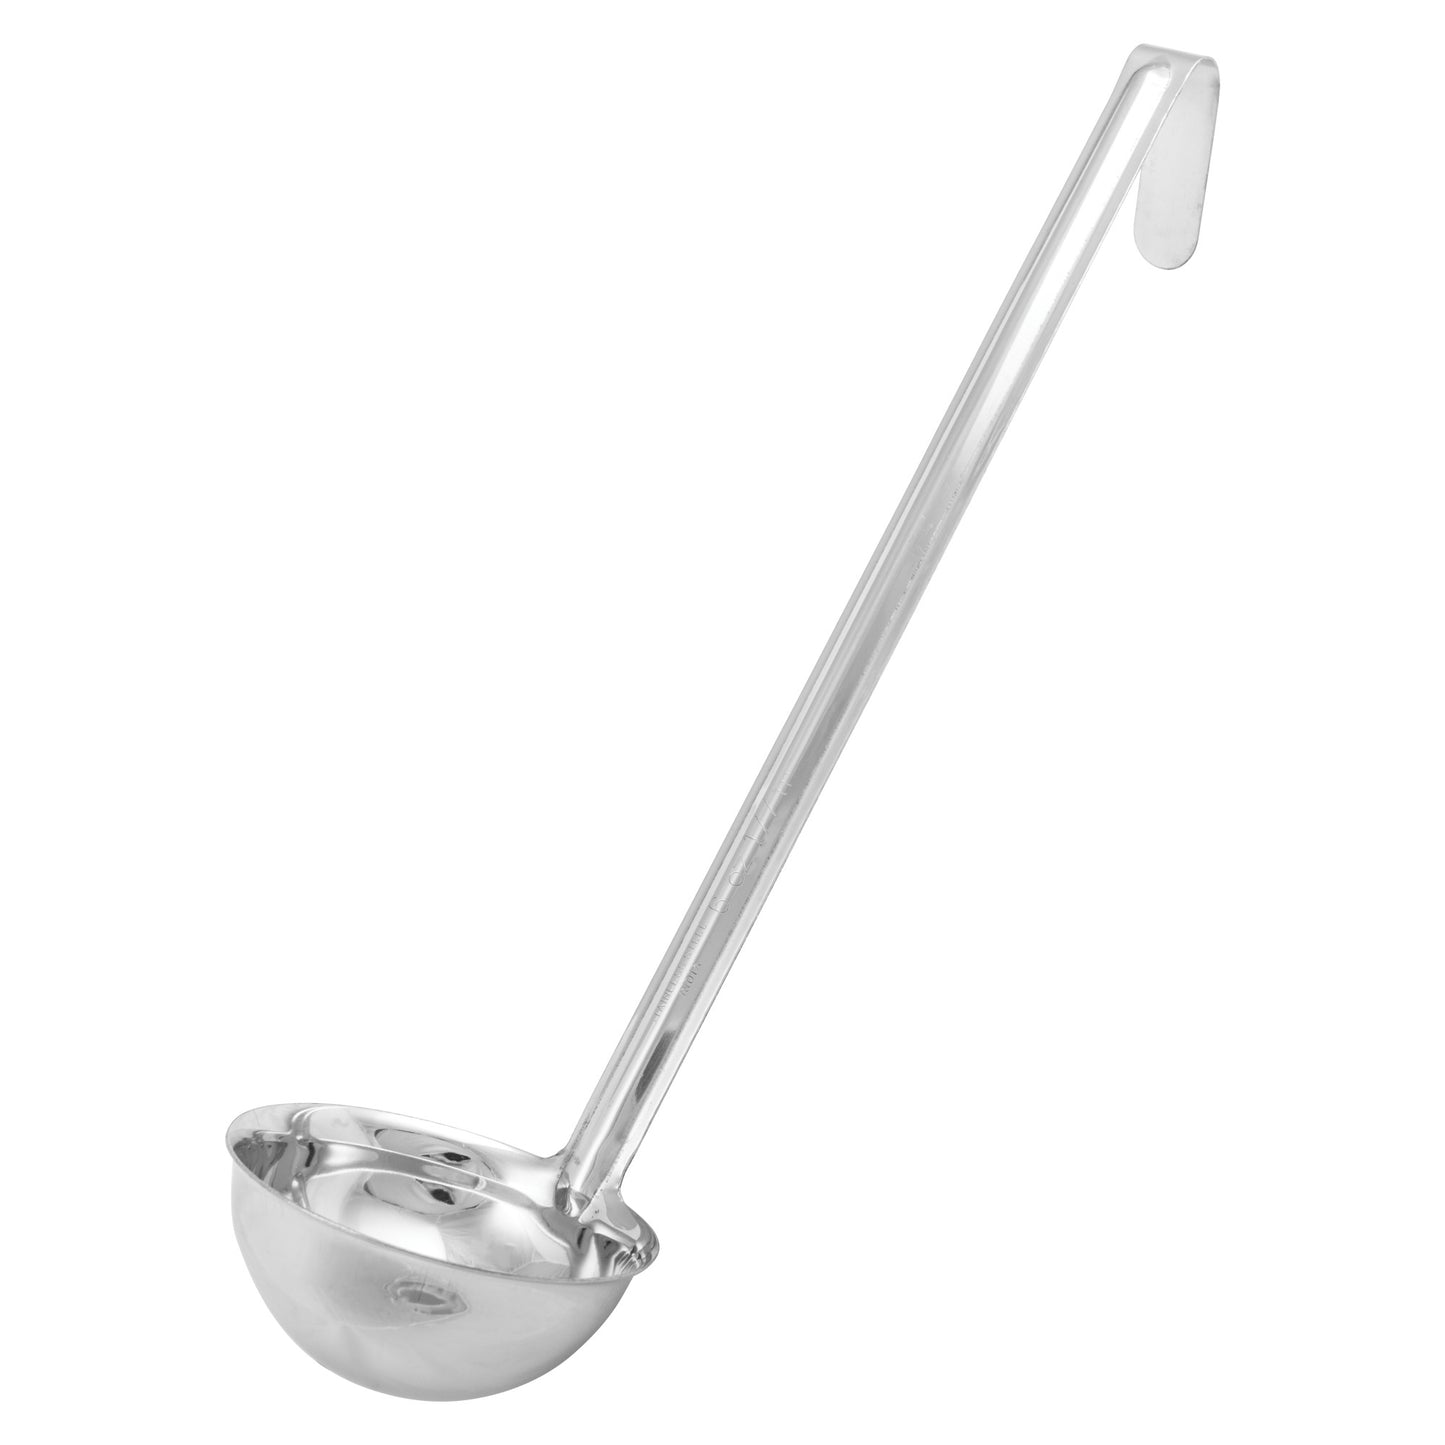 Winco Prime One-Piece Ladle, Stainless Steel - 6 oz